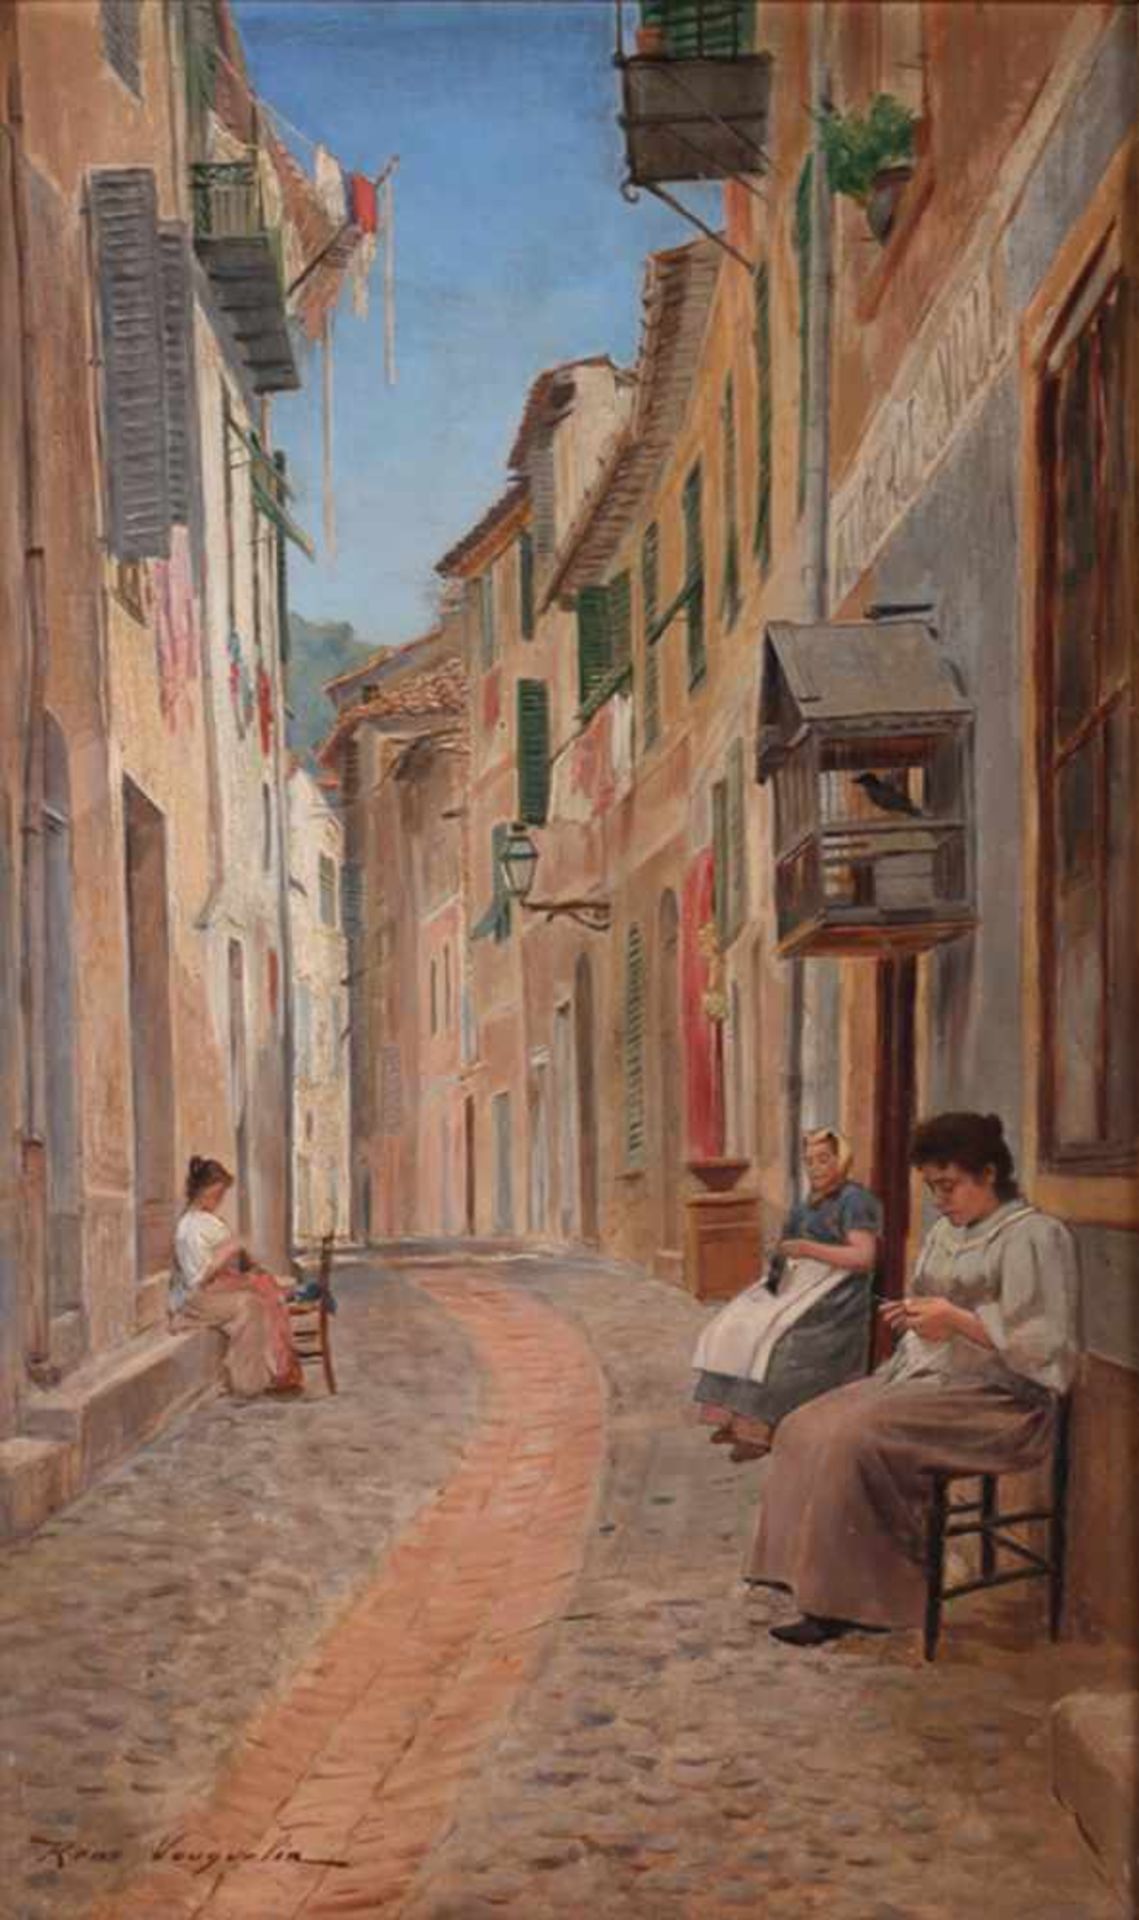 Vauquelin, Rene. Knitters. [Late of the XIX - beginning oh the XX century]. Oil on canvas. 46x27,5